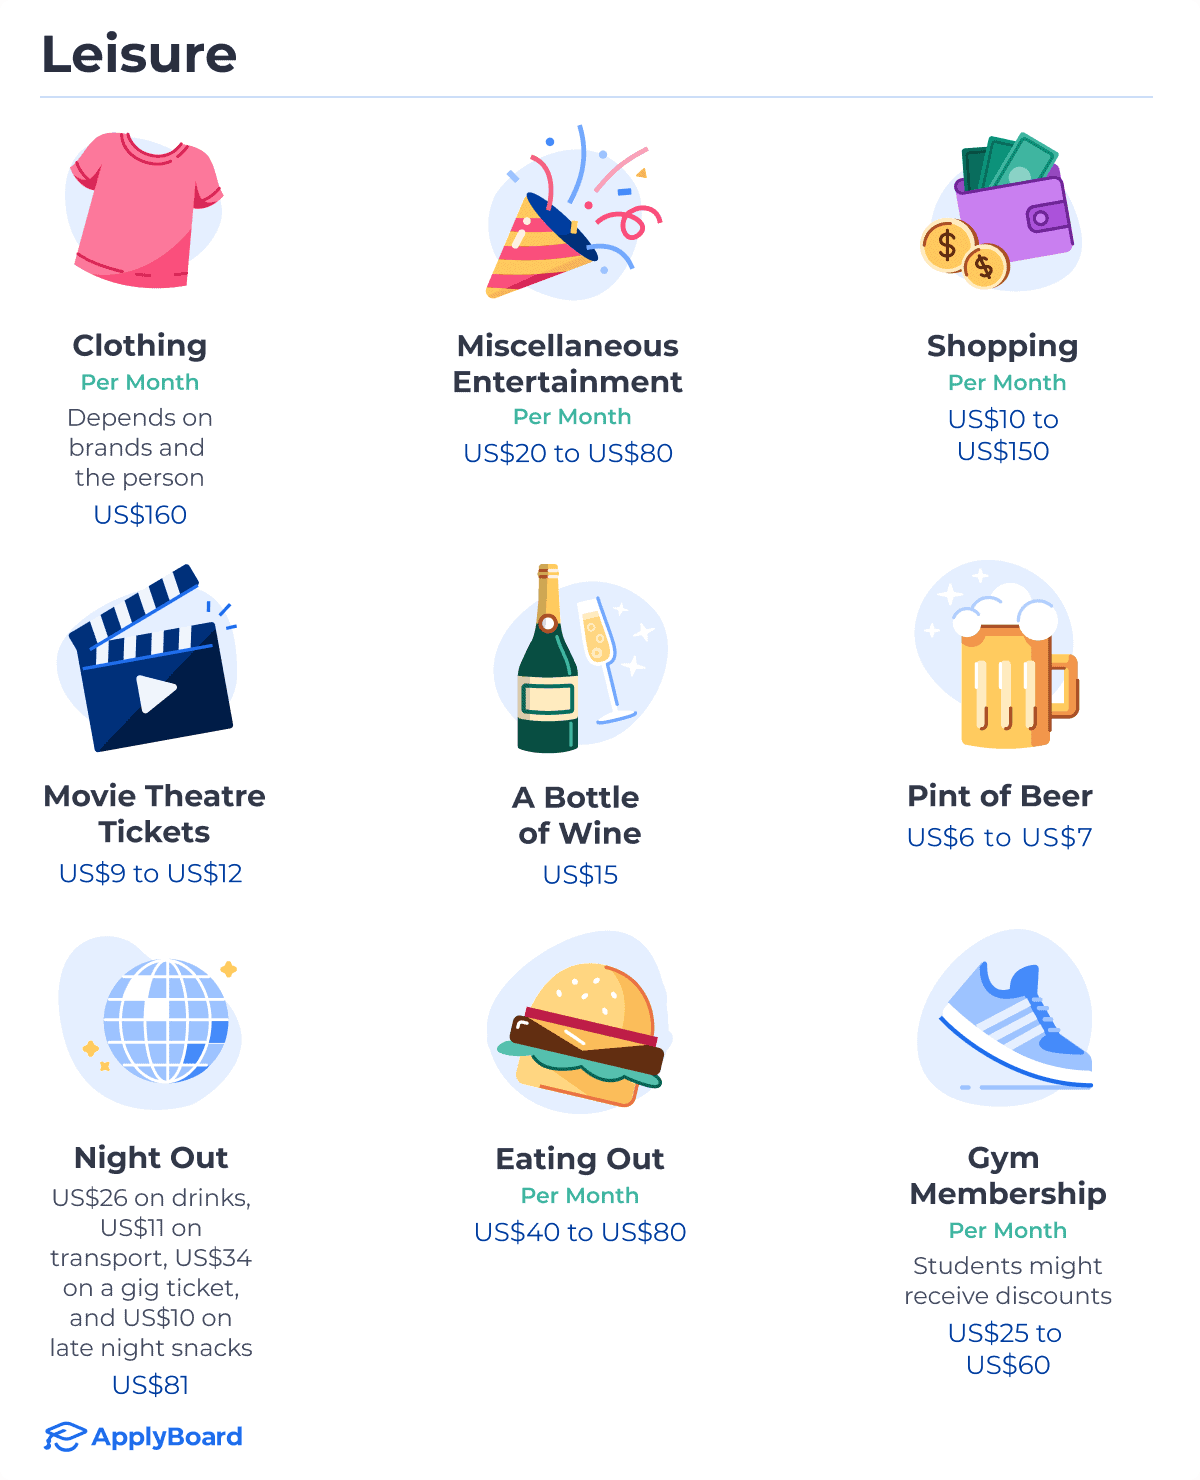 Infographics of clothing, miscellaneous entertainment, shopping, movie theatre tickets, bottle of wine, pint of beer, night out, eating out, and a gym membership, and the related costs.